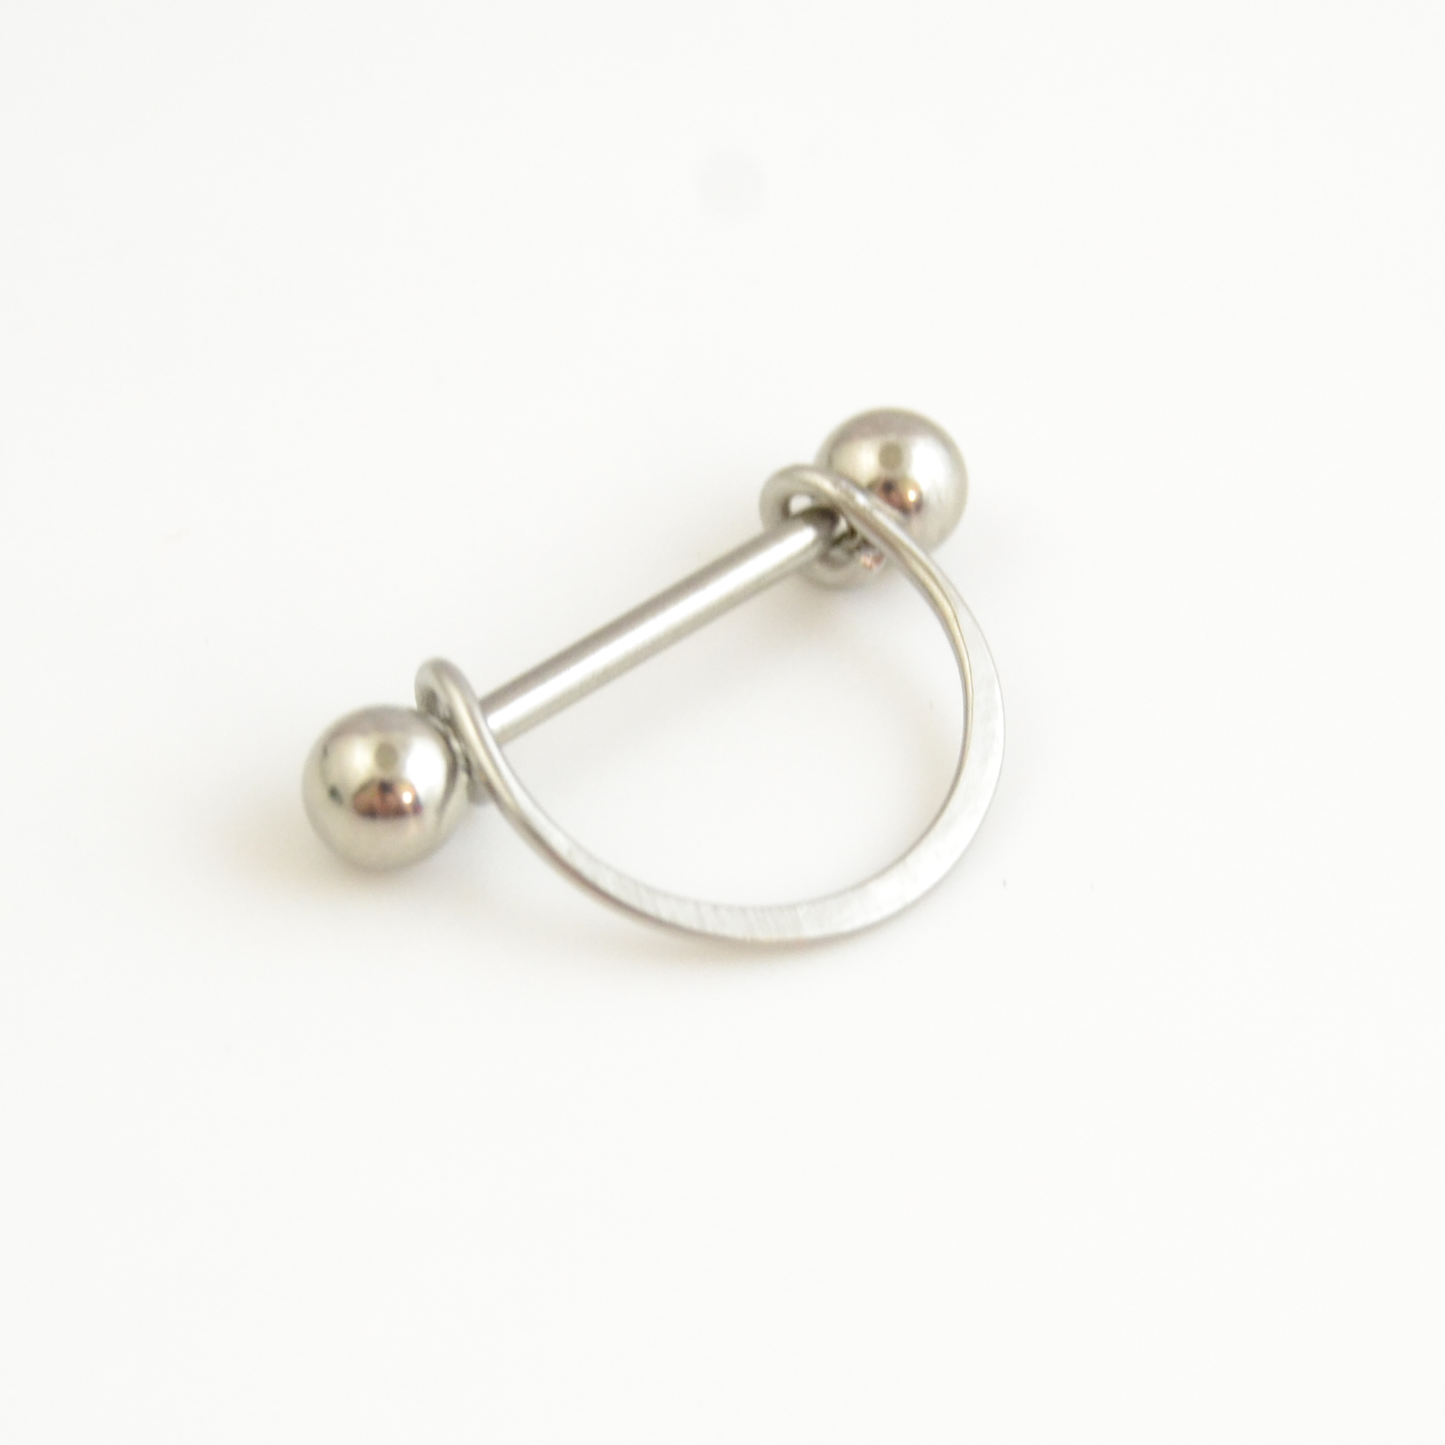 Smooth Chic 316L Stainless Steel 14ga Nipple Ring